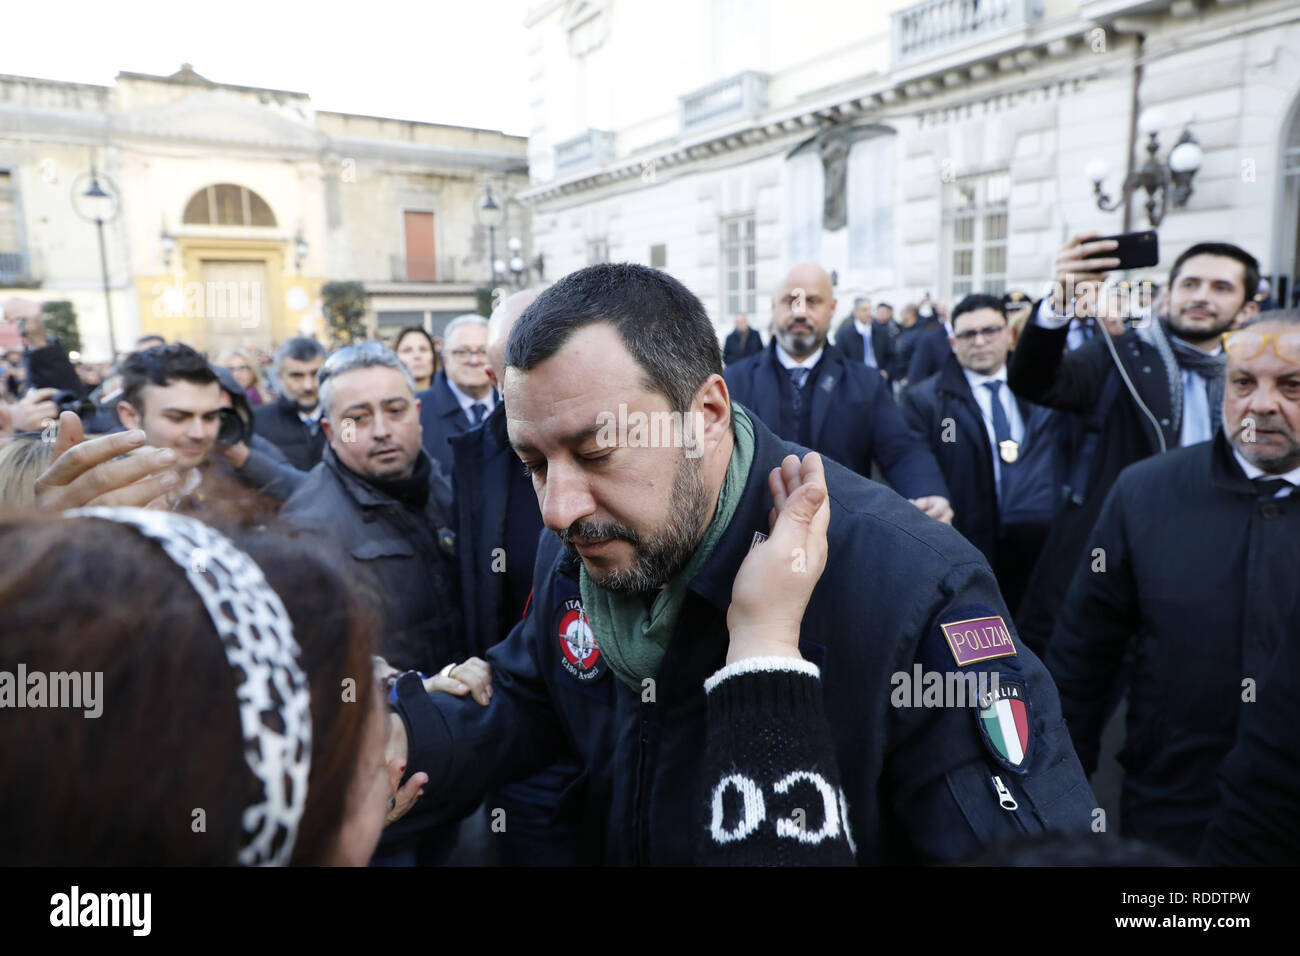 Italy. 18th Jan, 2019. January 18, 2019 - Afragola (Na) the Italian Interior Minister Matteo Salvini arrives in the province of Naples to give his reassurance on security given the latest incidents of extortion against tradesci as the pizza maker Gino Sorbillo to whom a bomb was put to intimidate him.in photo: Minister Matteo Salvini Credit: Fabio Sasso/ZUMA Wire/Alamy Live News Stock Photo